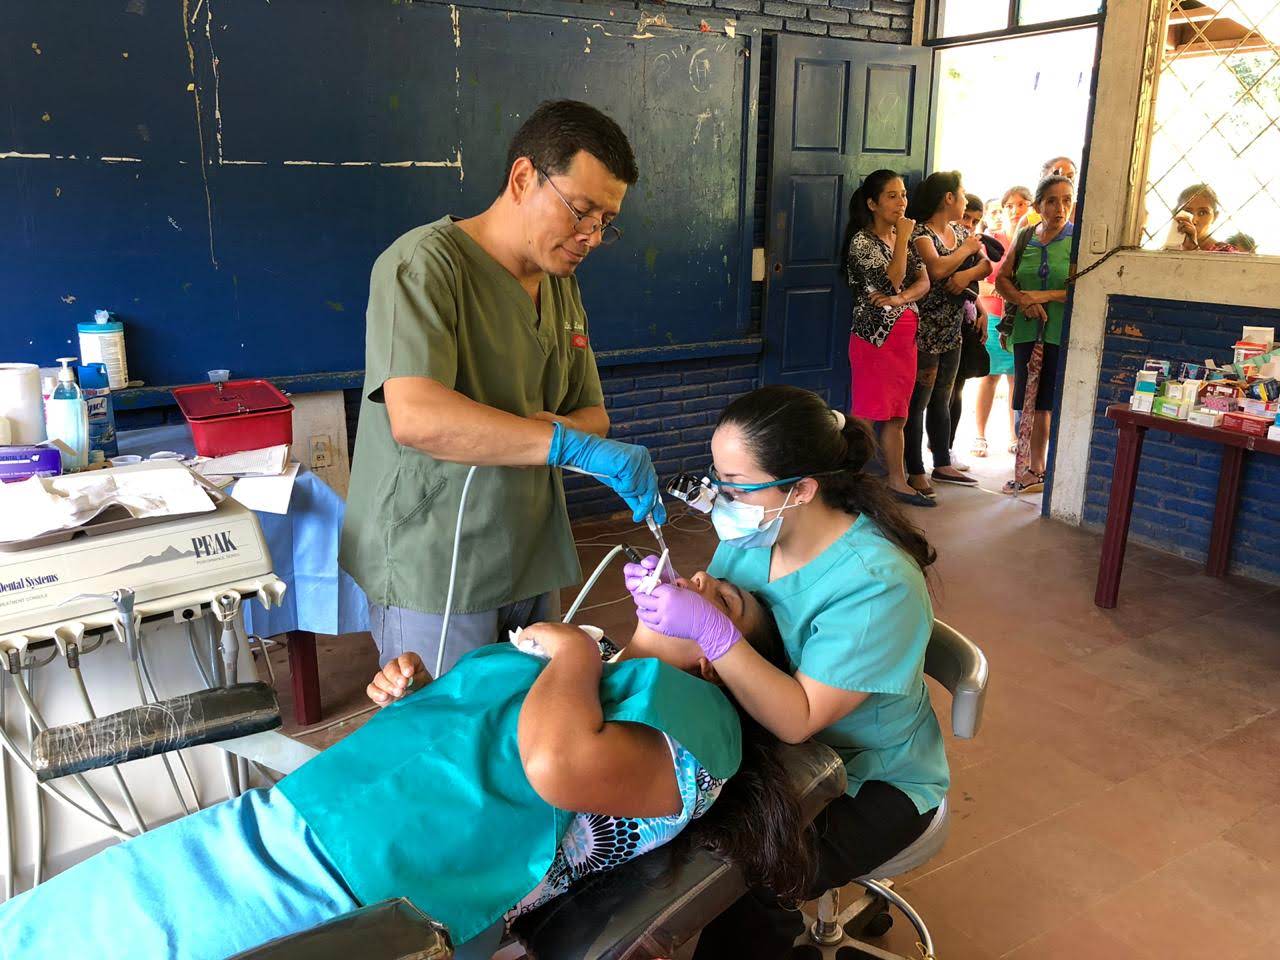 Patients in Nicaragua line up to receive dental treatment from Esperança’s medical brigade team, a program created to address the shortage of primary care services and medications in rural communities.